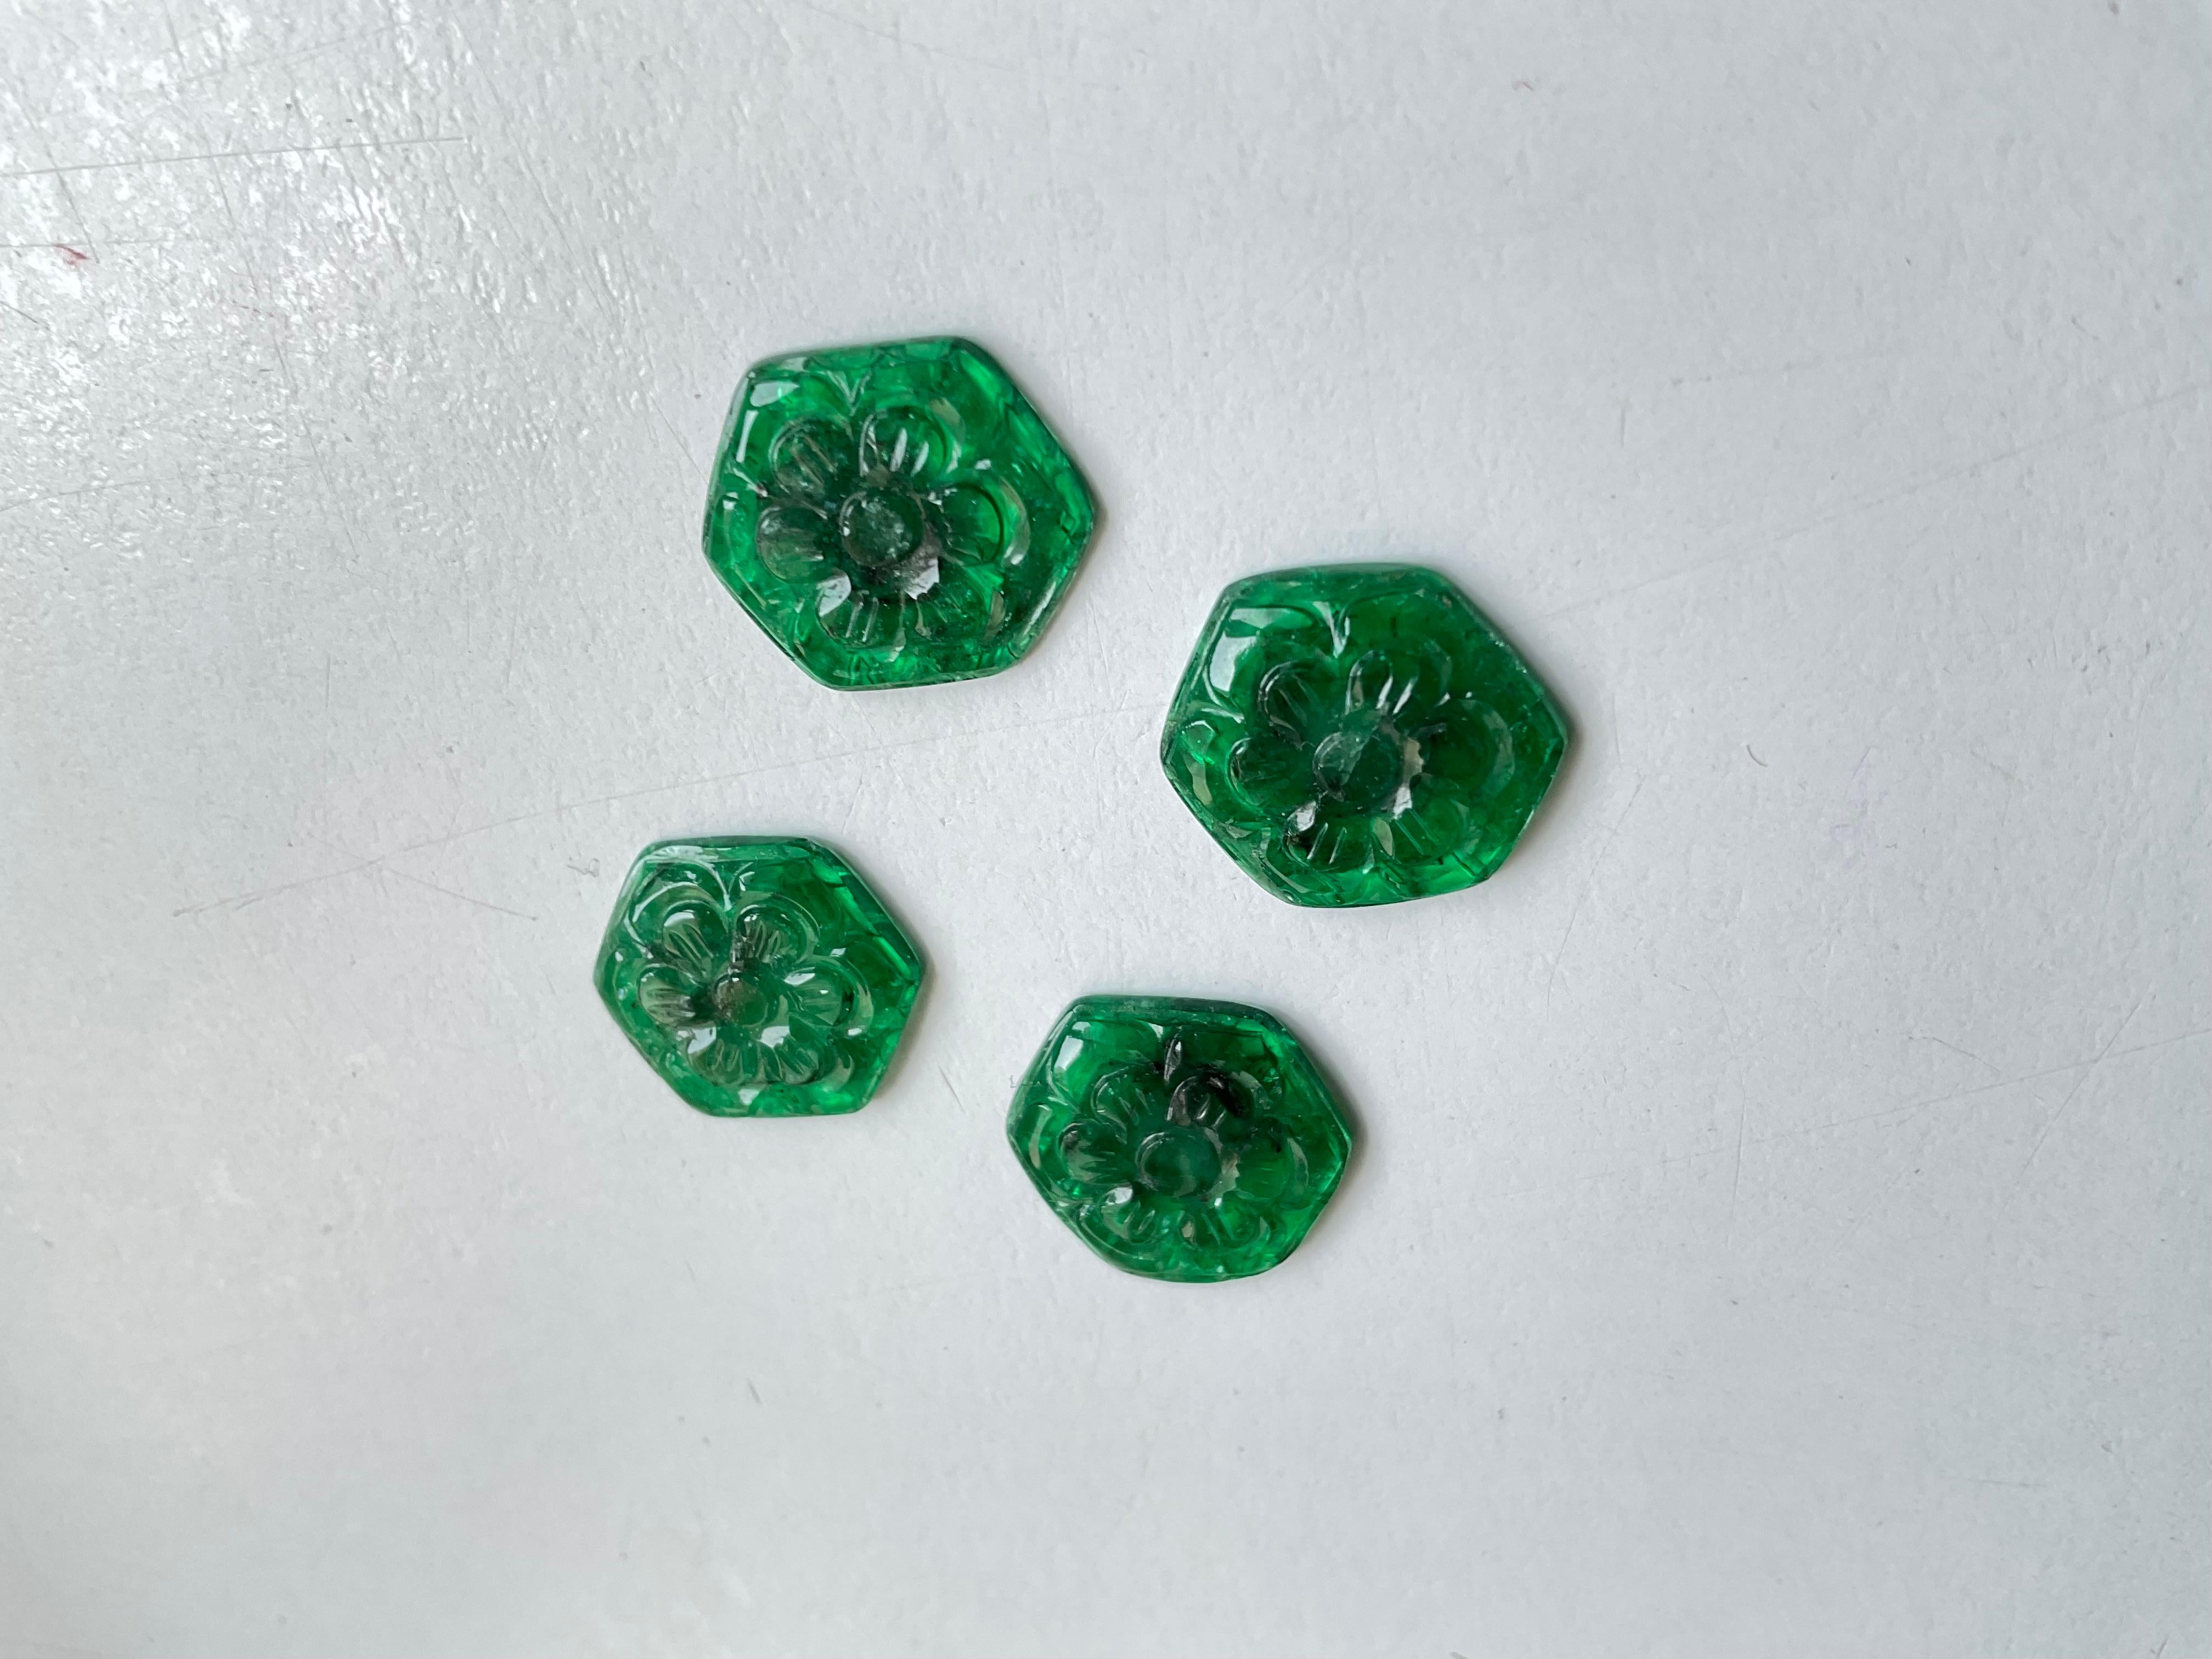 Hexagon Cut Zambian Emerald Hexagon Carved Fancy Cabochon Loose Gemstone for Jewelry For Sale